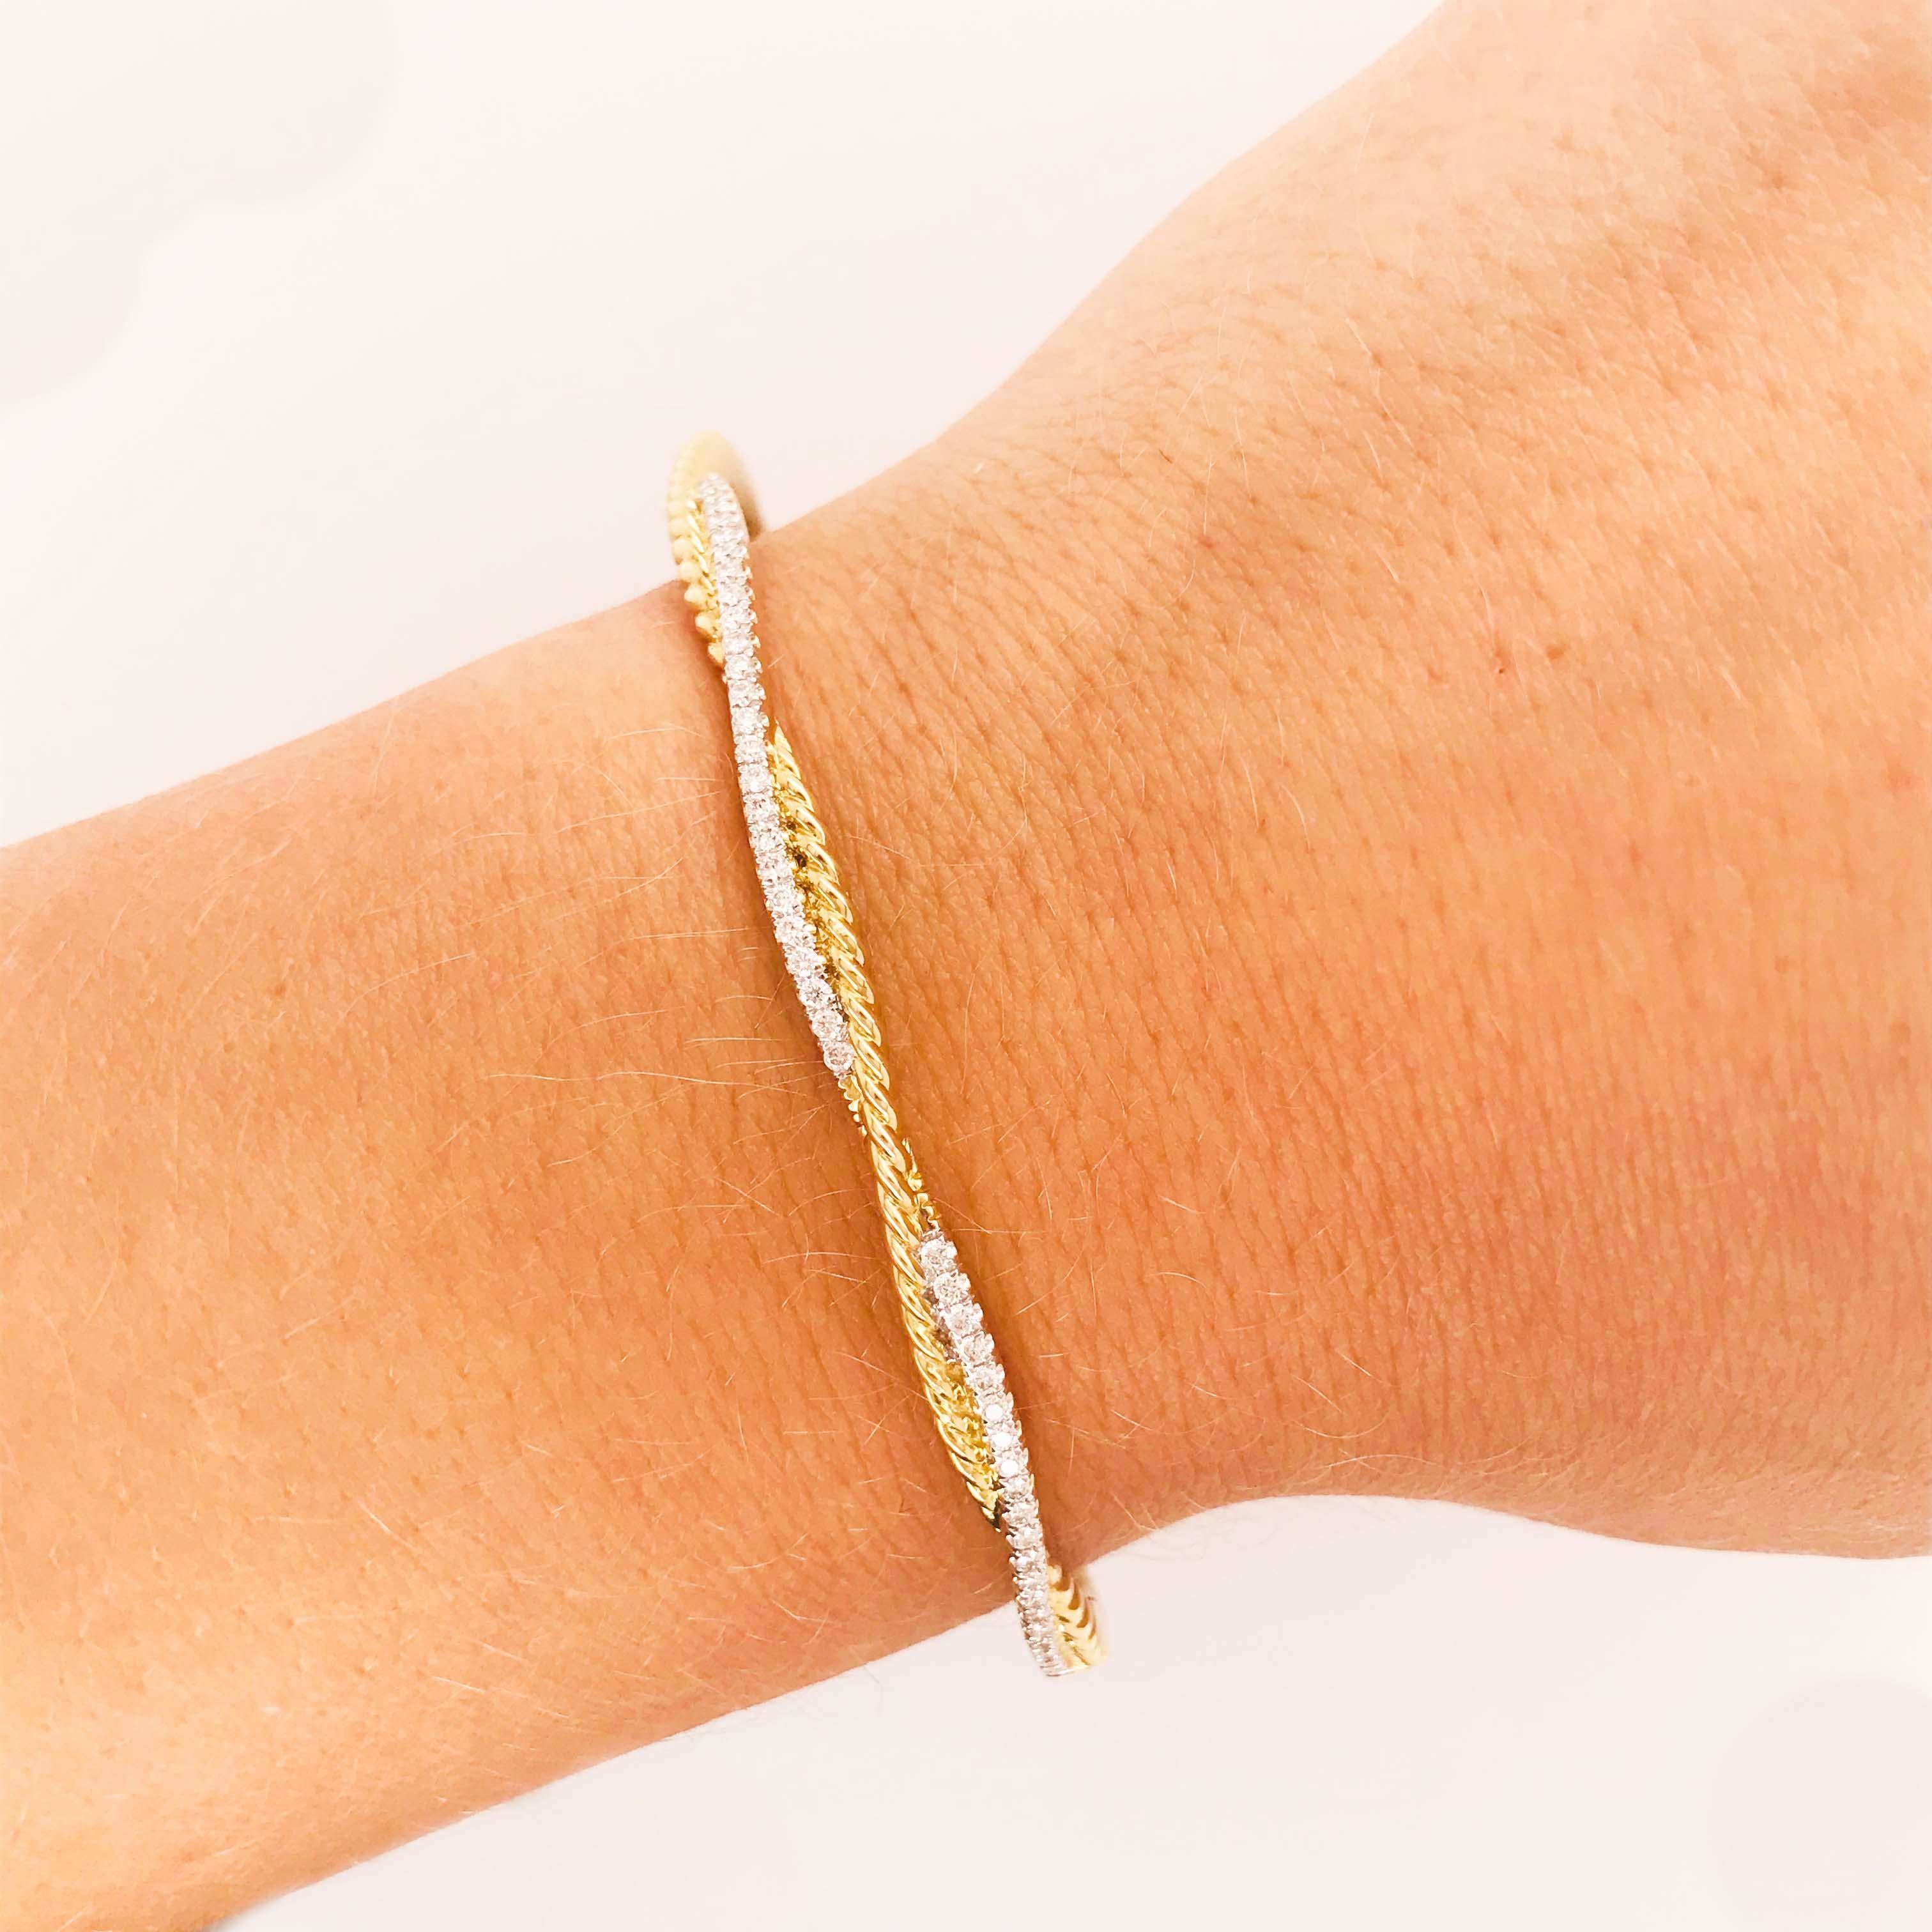 This diamond bangle bracelet is a twist design with a mix of 14 karat white and 14 kt yellow gold.  The luscious twisted rope design is lovely paired with a white gold thread that has diamonds all the way around.  This bracelet will fit an extra